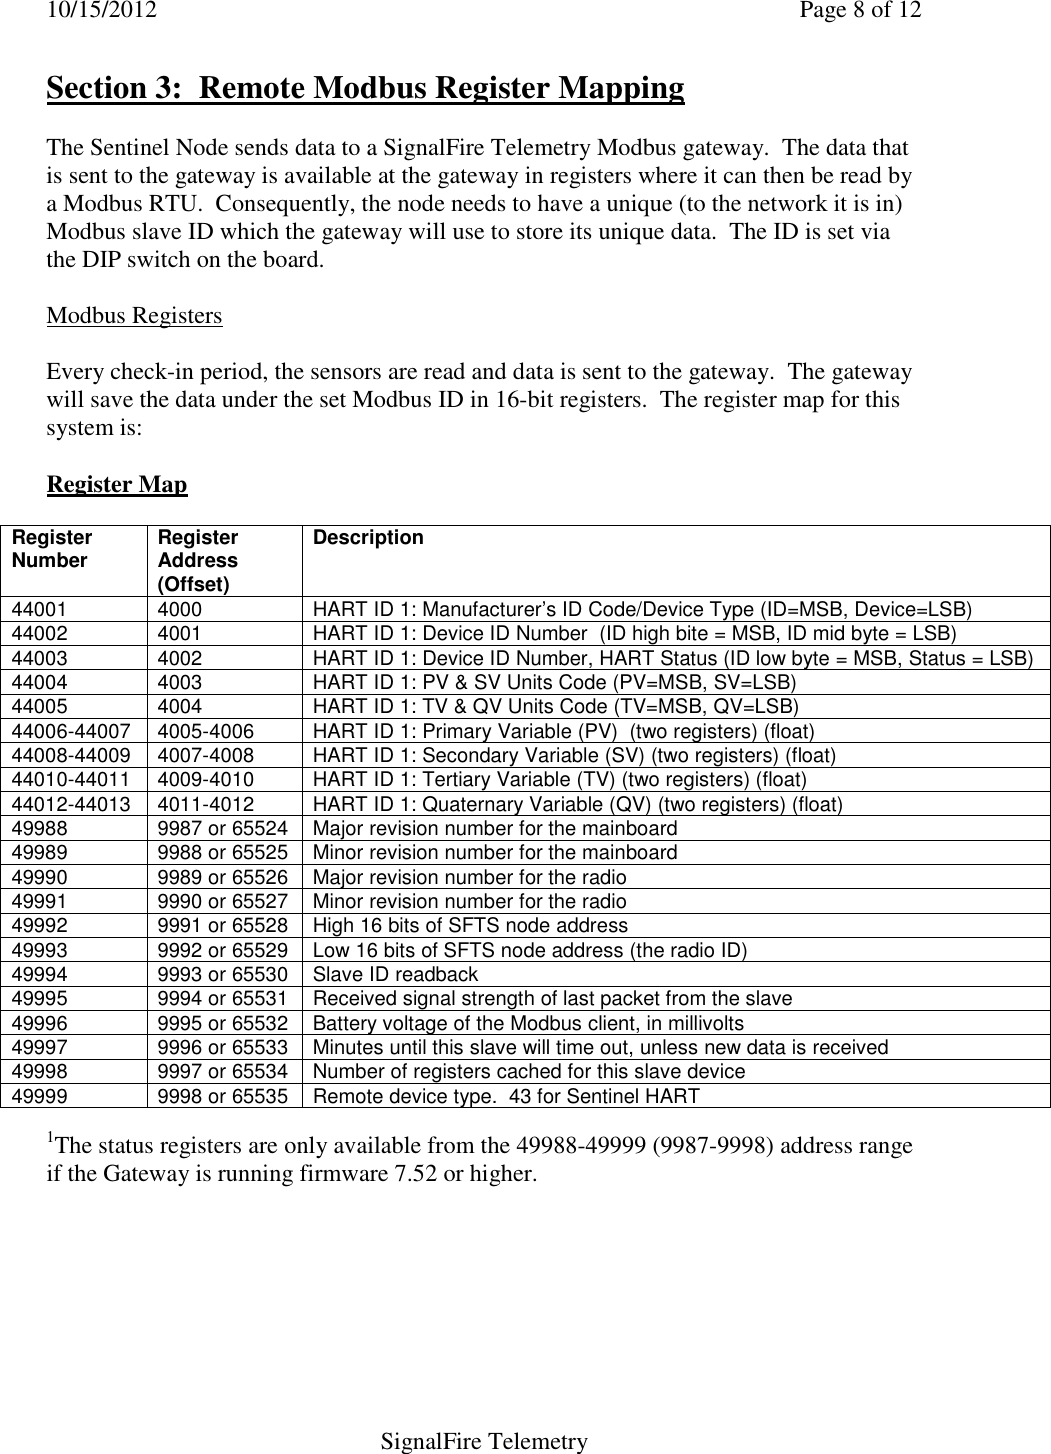 10/15/2012    Page 8 of 12   SignalFire Telemetry Section 3:  Remote Modbus Register Mapping  The Sentinel Node sends data to a SignalFire Telemetry Modbus gateway.  The data that is sent to the gateway is available at the gateway in registers where it can then be read by a Modbus RTU.  Consequently, the node needs to have a unique (to the network it is in) Modbus slave ID which the gateway will use to store its unique data.  The ID is set via the DIP switch on the board.  Modbus Registers  Every check-in period, the sensors are read and data is sent to the gateway.  The gateway will save the data under the set Modbus ID in 16-bit registers.  The register map for this system is:  Register Map   Register Number Register Address (Offset) Description 44001  4000  HART ID 1: Manufacturer’s ID Code/Device Type (ID=MSB, Device=LSB) 44002  4001  HART ID 1: Device ID Number  (ID high bite = MSB, ID mid byte = LSB) 44003  4002  HART ID 1: Device ID Number, HART Status (ID low byte = MSB, Status = LSB) 44004  4003  HART ID 1: PV &amp; SV Units Code (PV=MSB, SV=LSB) 44005  4004  HART ID 1: TV &amp; QV Units Code (TV=MSB, QV=LSB) 44006-44007  4005-4006  HART ID 1: Primary Variable (PV)  (two registers) (float) 44008-44009  4007-4008  HART ID 1: Secondary Variable (SV) (two registers) (float) 44010-44011  4009-4010  HART ID 1: Tertiary Variable (TV) (two registers) (float) 44012-44013  4011-4012  HART ID 1: Quaternary Variable (QV) (two registers) (float) 49988  9987 or 65524  Major revision number for the mainboard 49989  9988 or 65525  Minor revision number for the mainboard 49990  9989 or 65526  Major revision number for the radio 49991  9990 or 65527  Minor revision number for the radio 49992  9991 or 65528  High 16 bits of SFTS node address 49993  9992 or 65529  Low 16 bits of SFTS node address (the radio ID) 49994  9993 or 65530  Slave ID readback 49995  9994 or 65531  Received signal strength of last packet from the slave 49996  9995 or 65532  Battery voltage of the Modbus client, in millivolts 49997  9996 or 65533  Minutes until this slave will time out, unless new data is received 49998  9997 or 65534  Number of registers cached for this slave device 49999  9998 or 65535  Remote device type.  43 for Sentinel HART  1The status registers are only available from the 49988-49999 (9987-9998) address range if the Gateway is running firmware 7.52 or higher.       